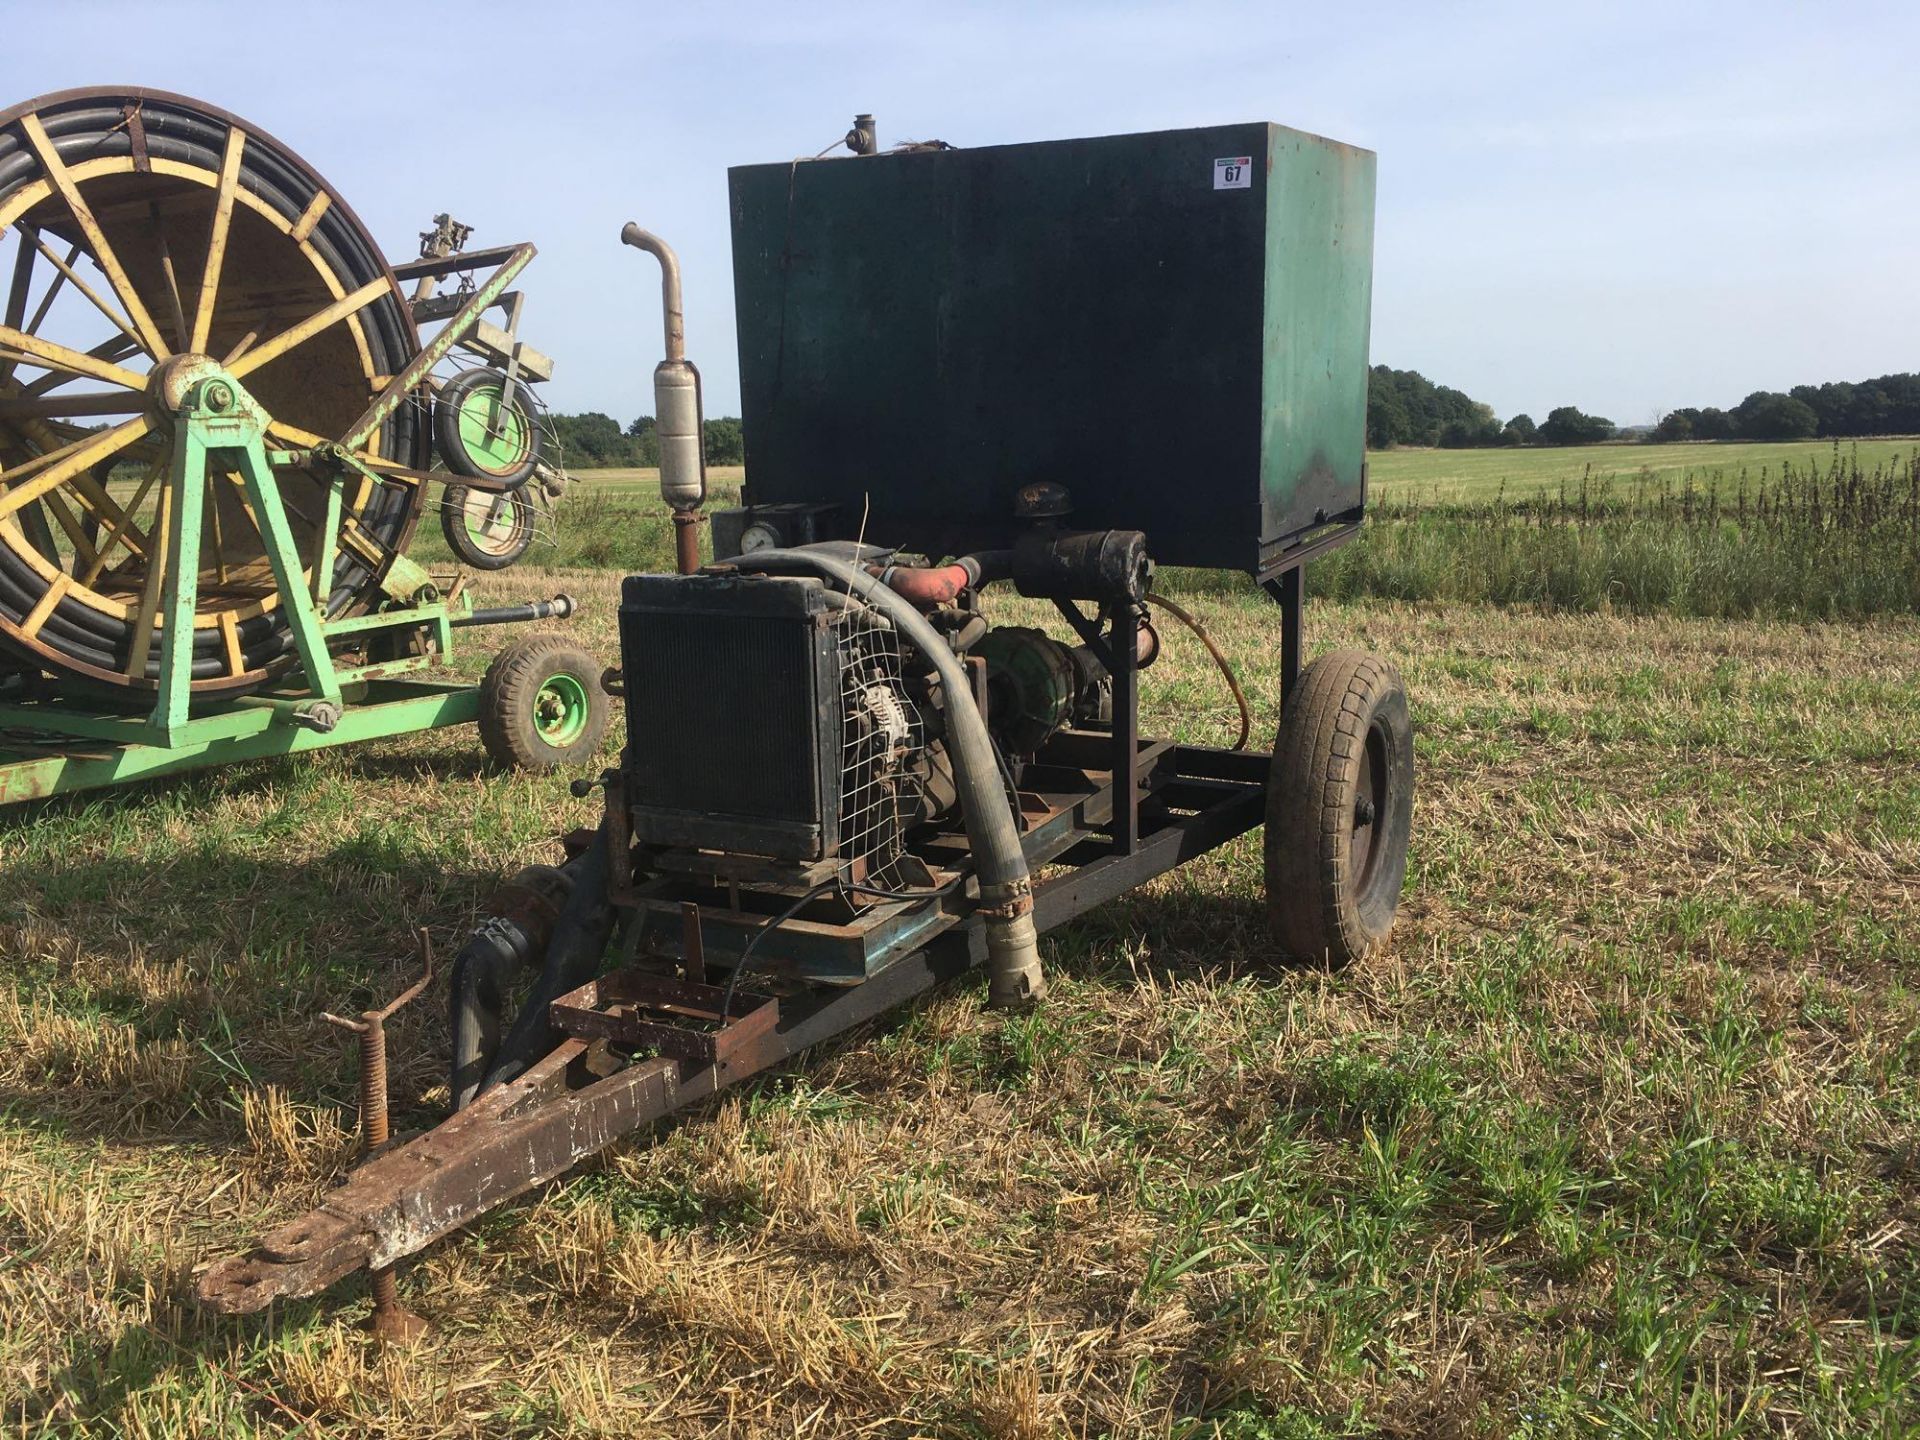 Irrigation pump on transport frame with mounted diesel tank. - Image 2 of 3